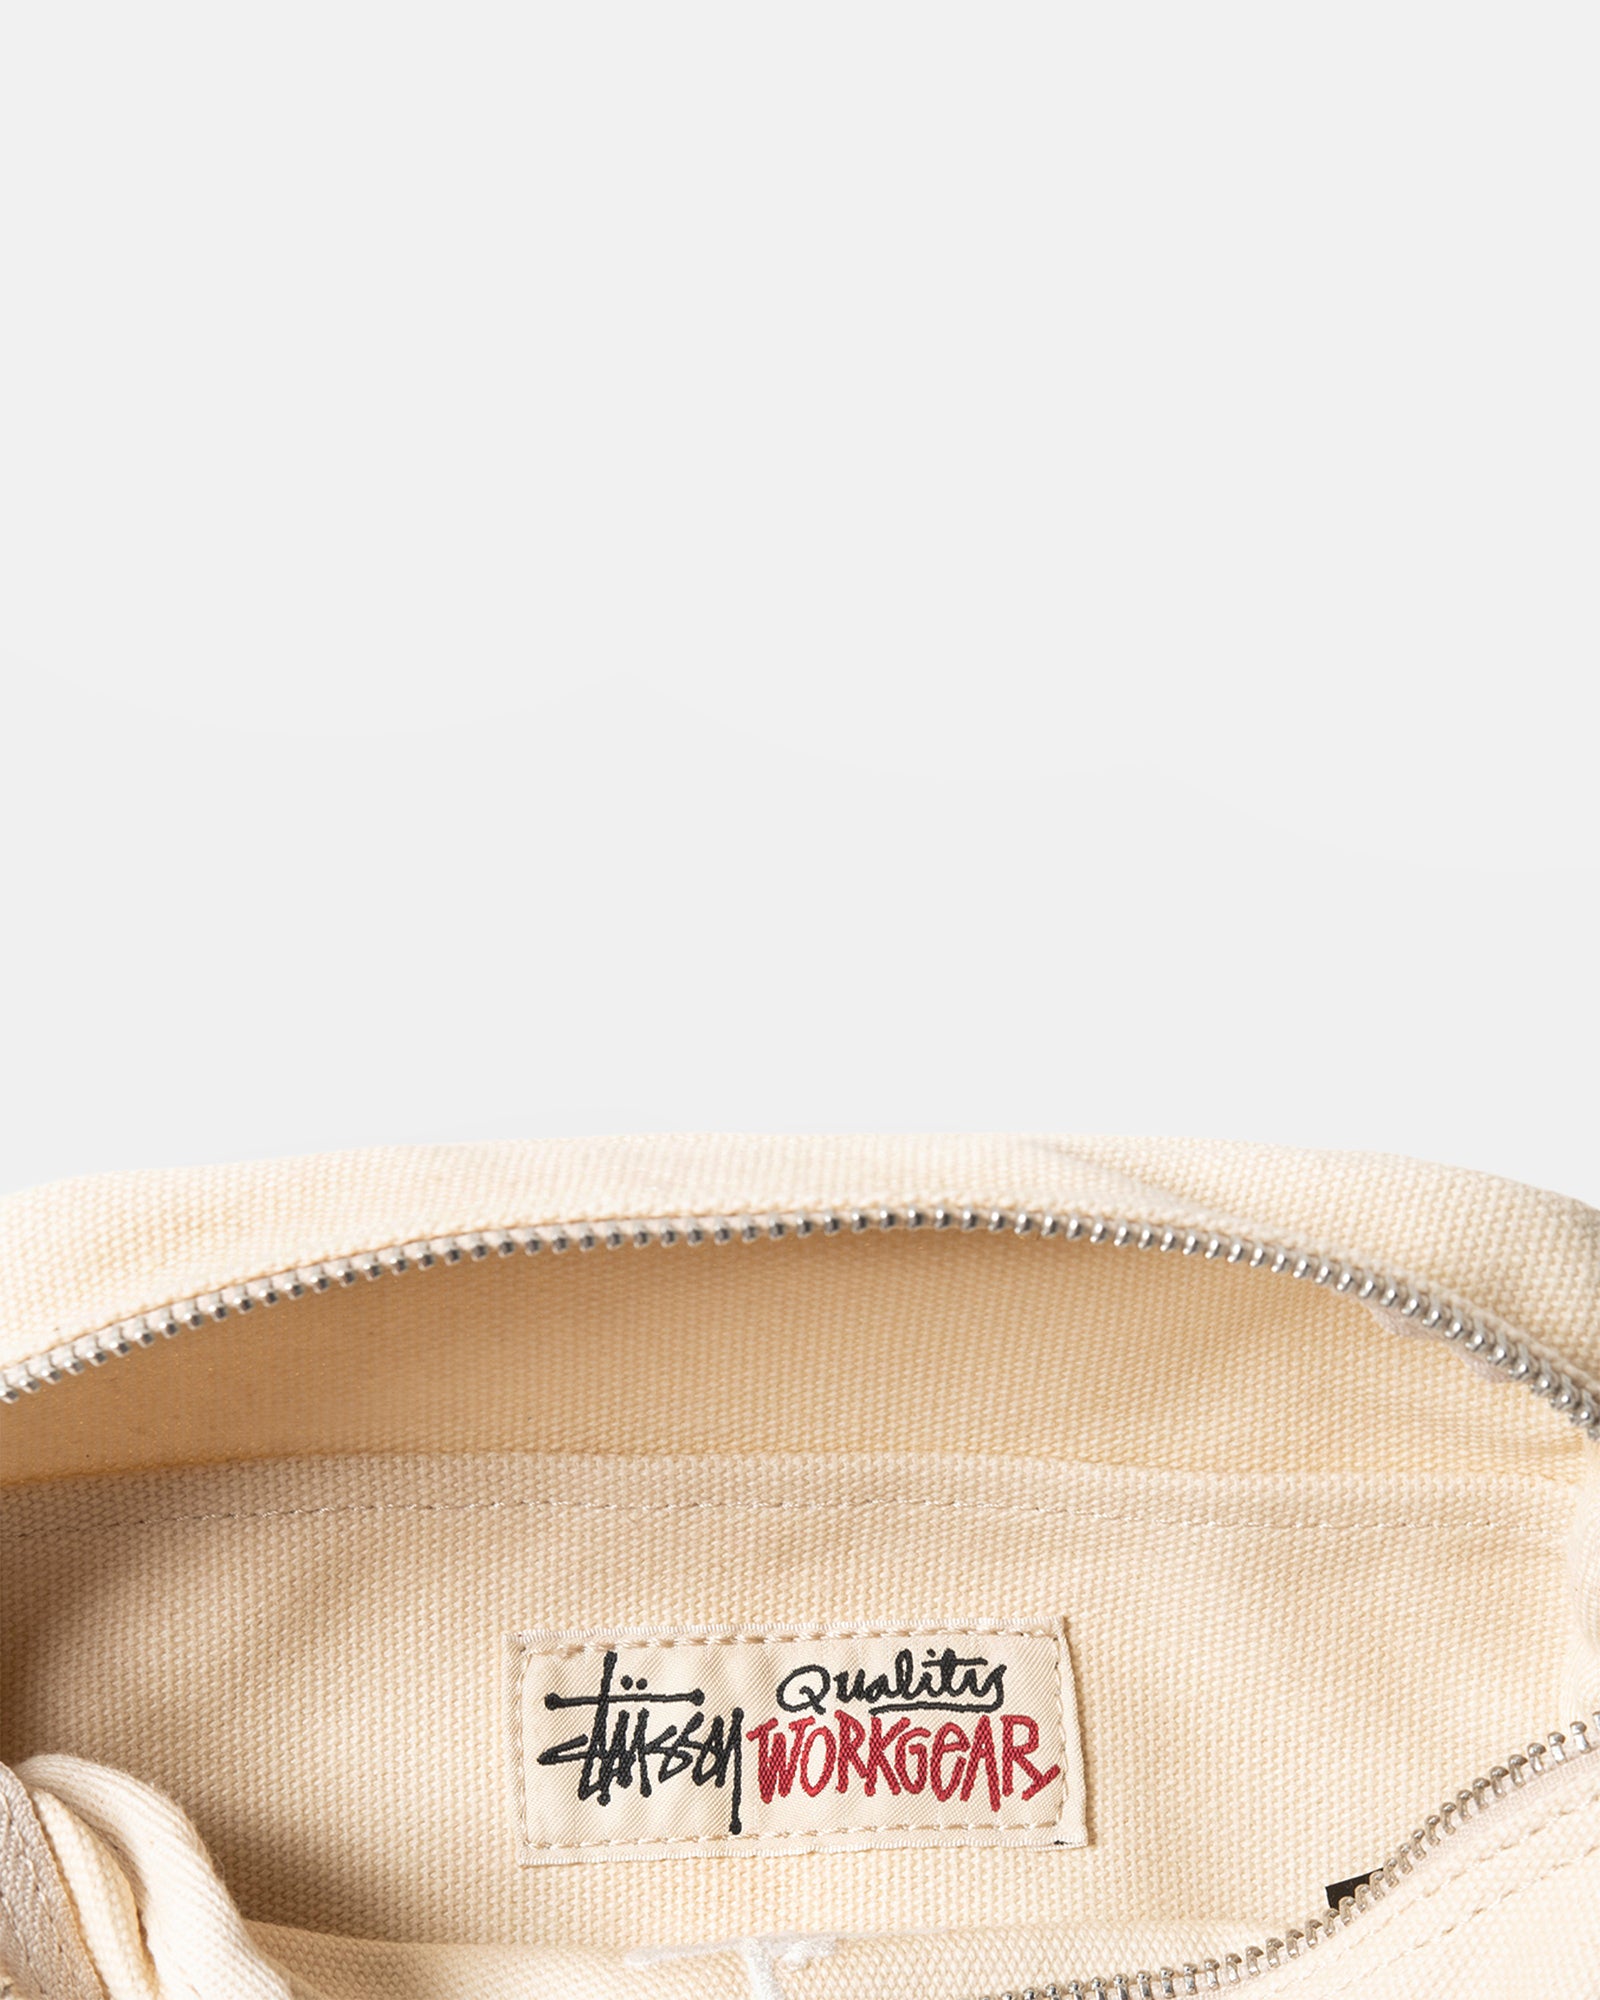 STÜSSY CANVAS SIDE POUCH  ACCESSORY